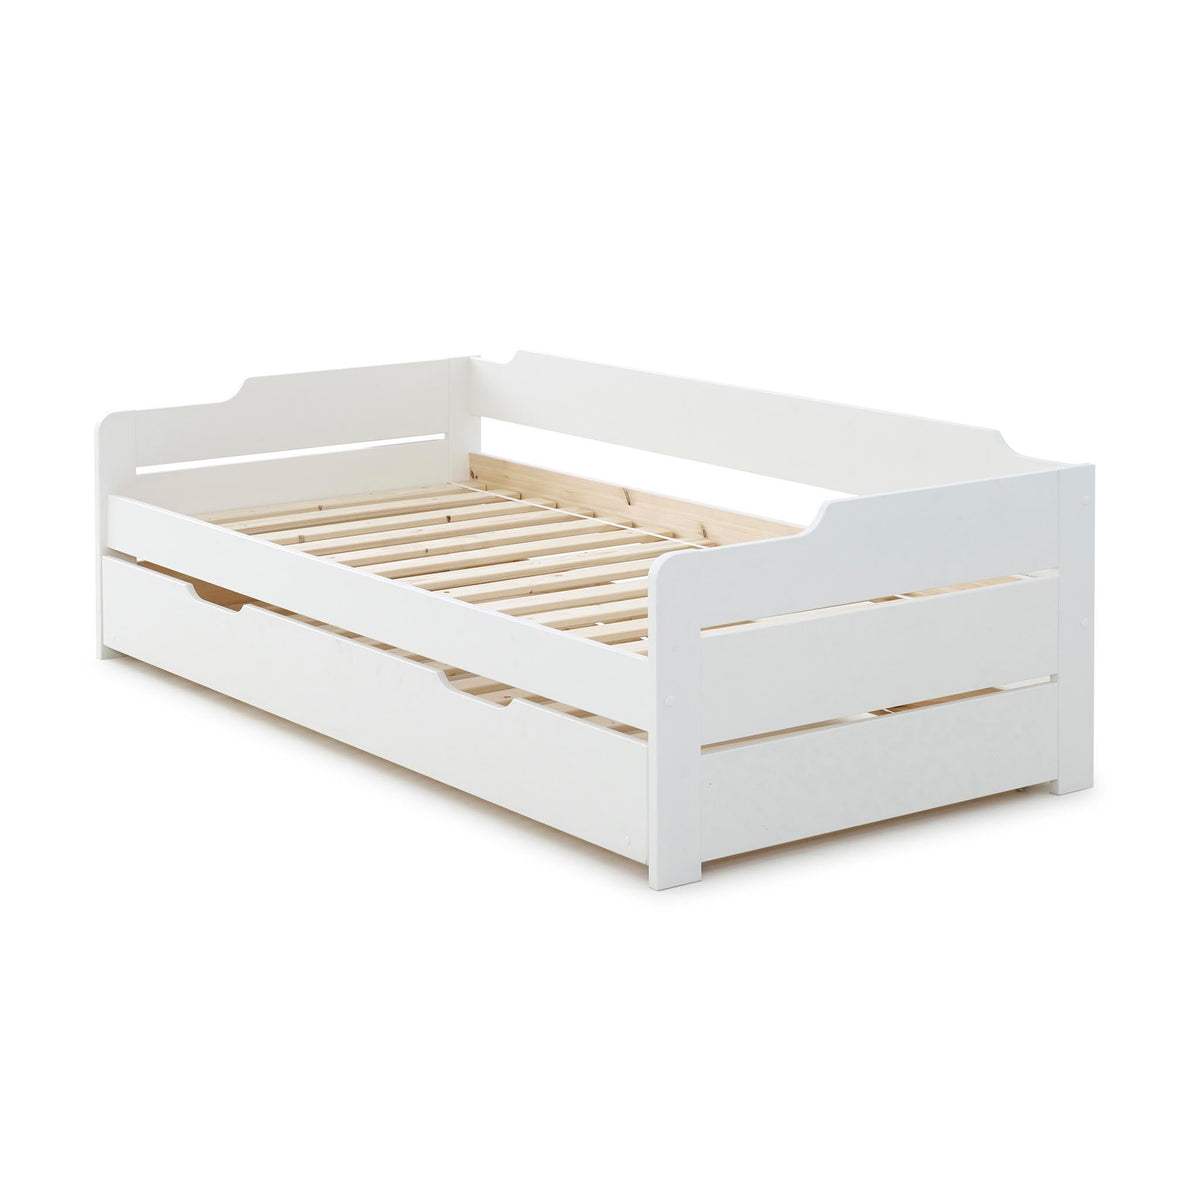 Snooze White Wooden Bed Frame with closed Trundle 